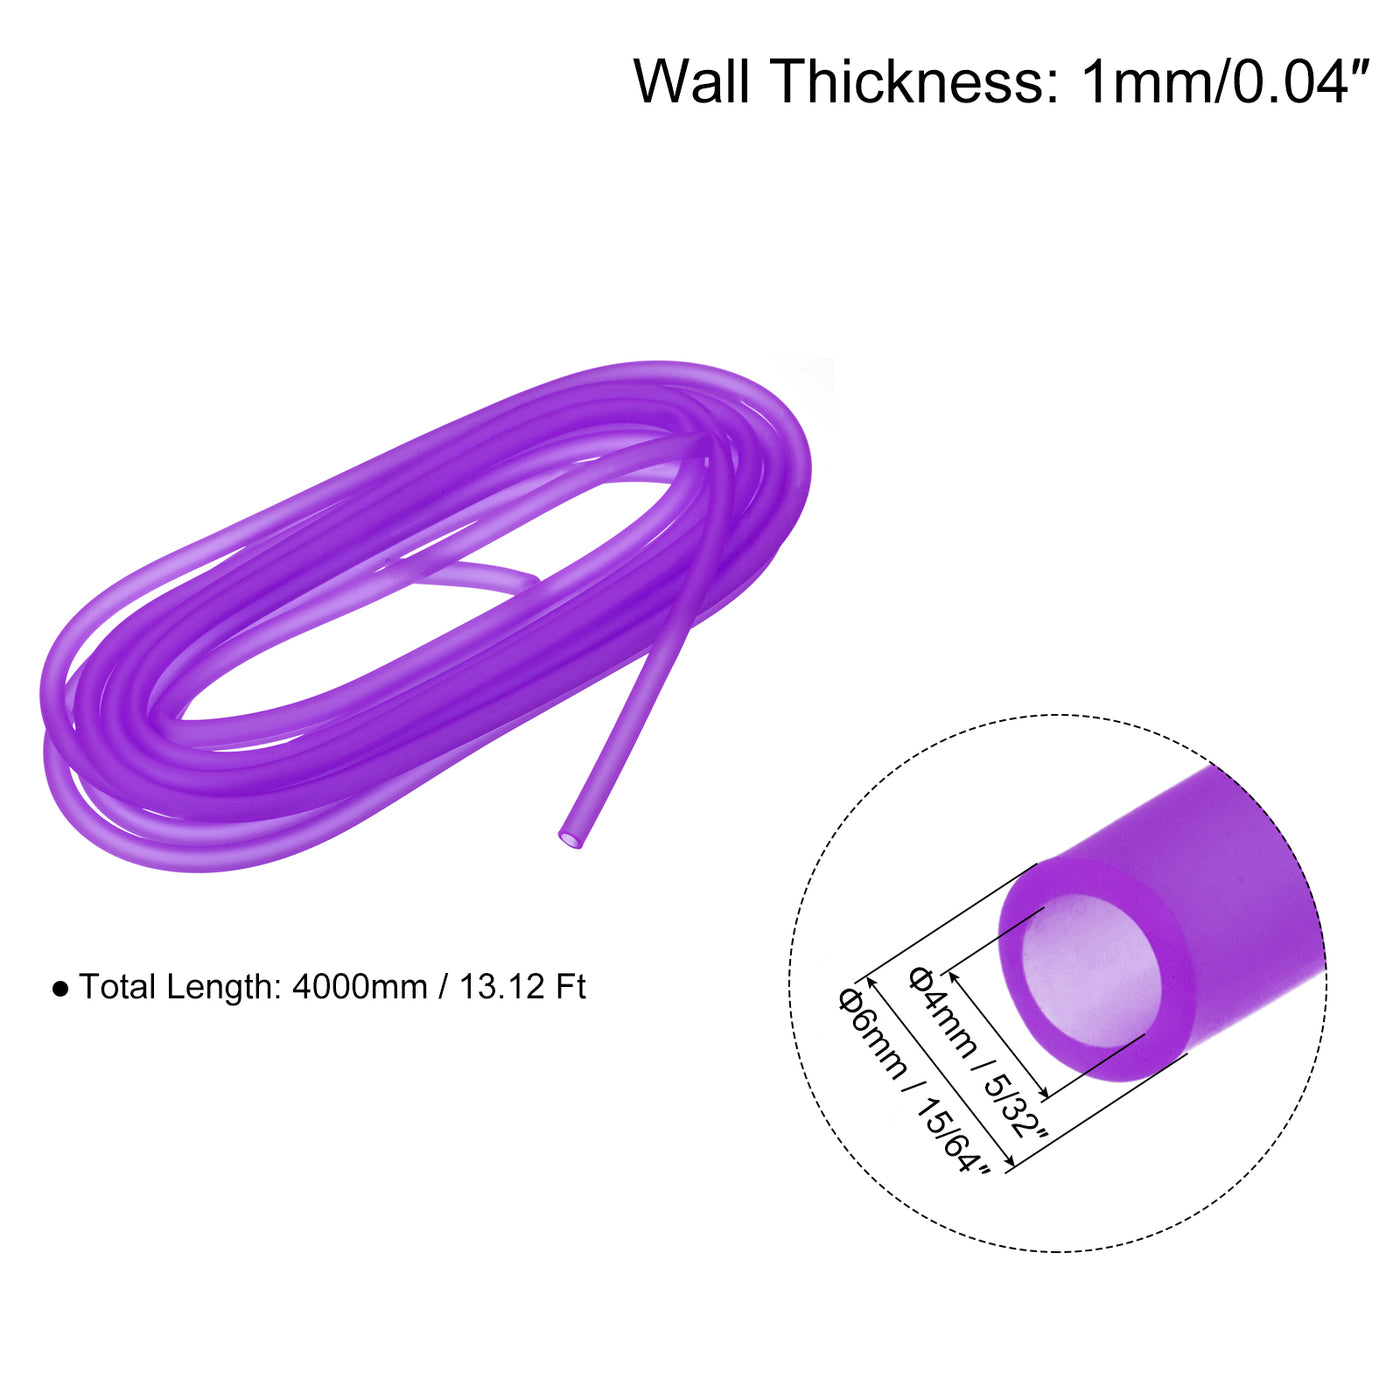 uxcell Uxcell Silicone Tubing 5/32" ID, 15/64" OD 1Pcs 13.12 Ft for Pump Transfer, Purple